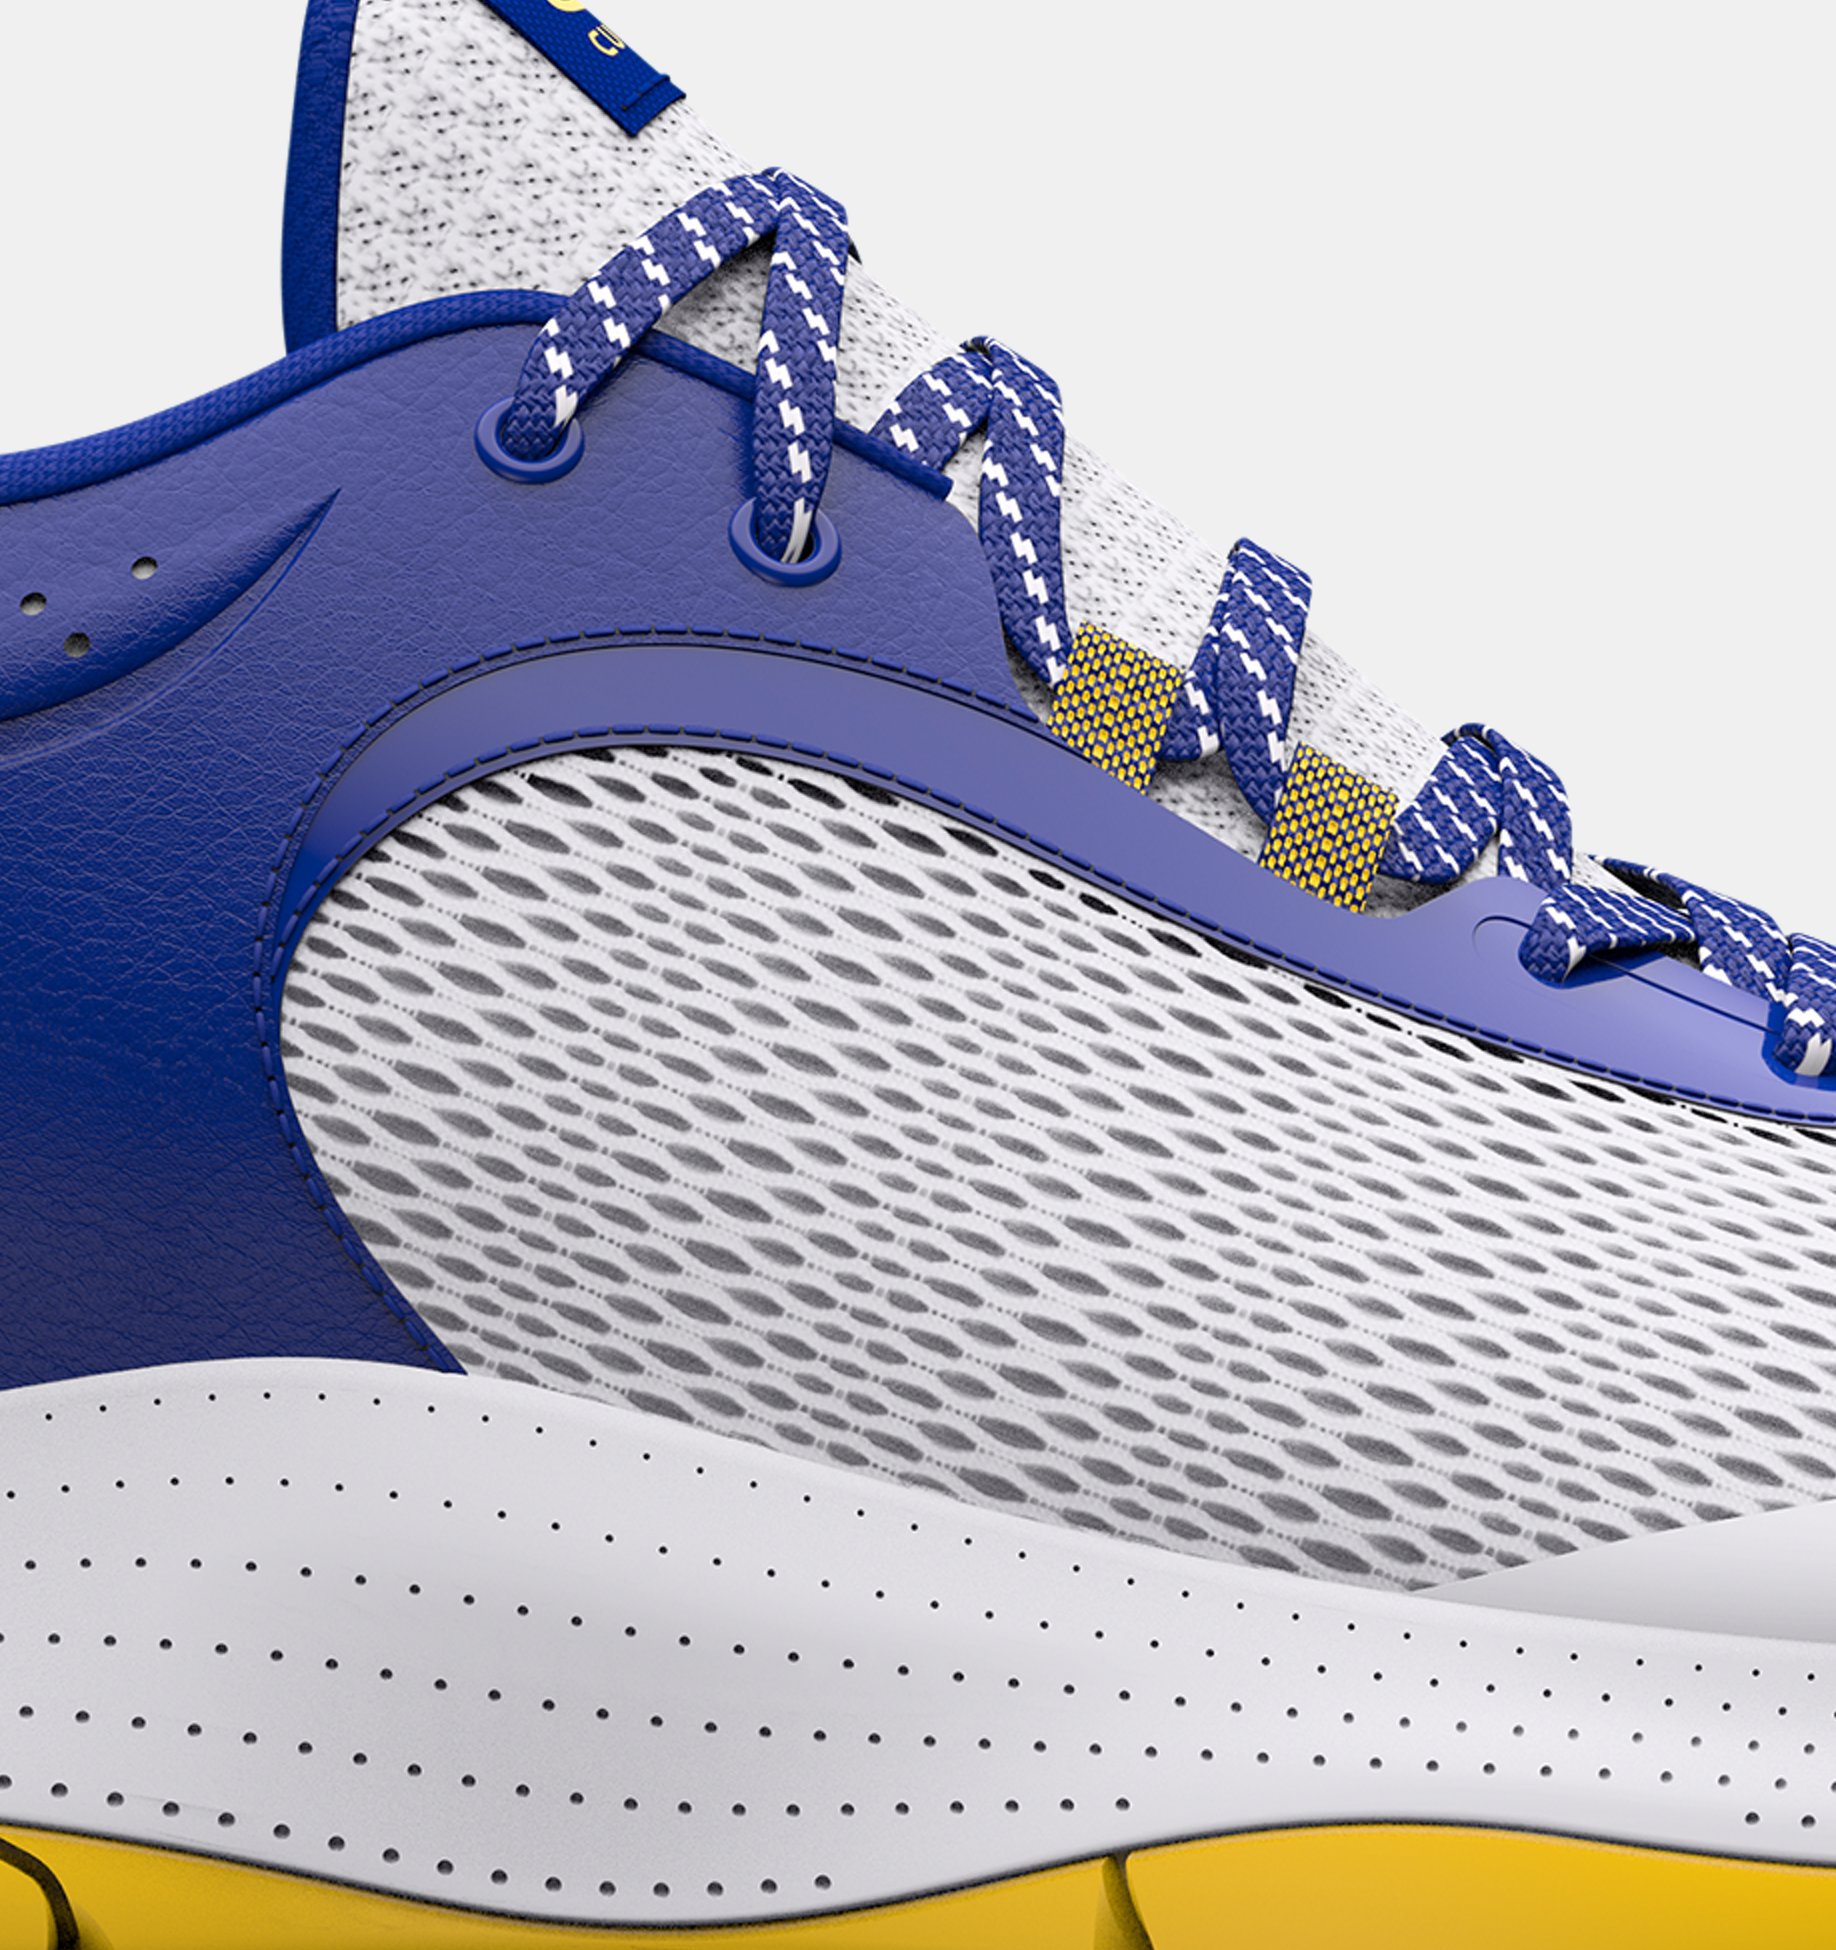 Unisex Curry Shoes Under Armour